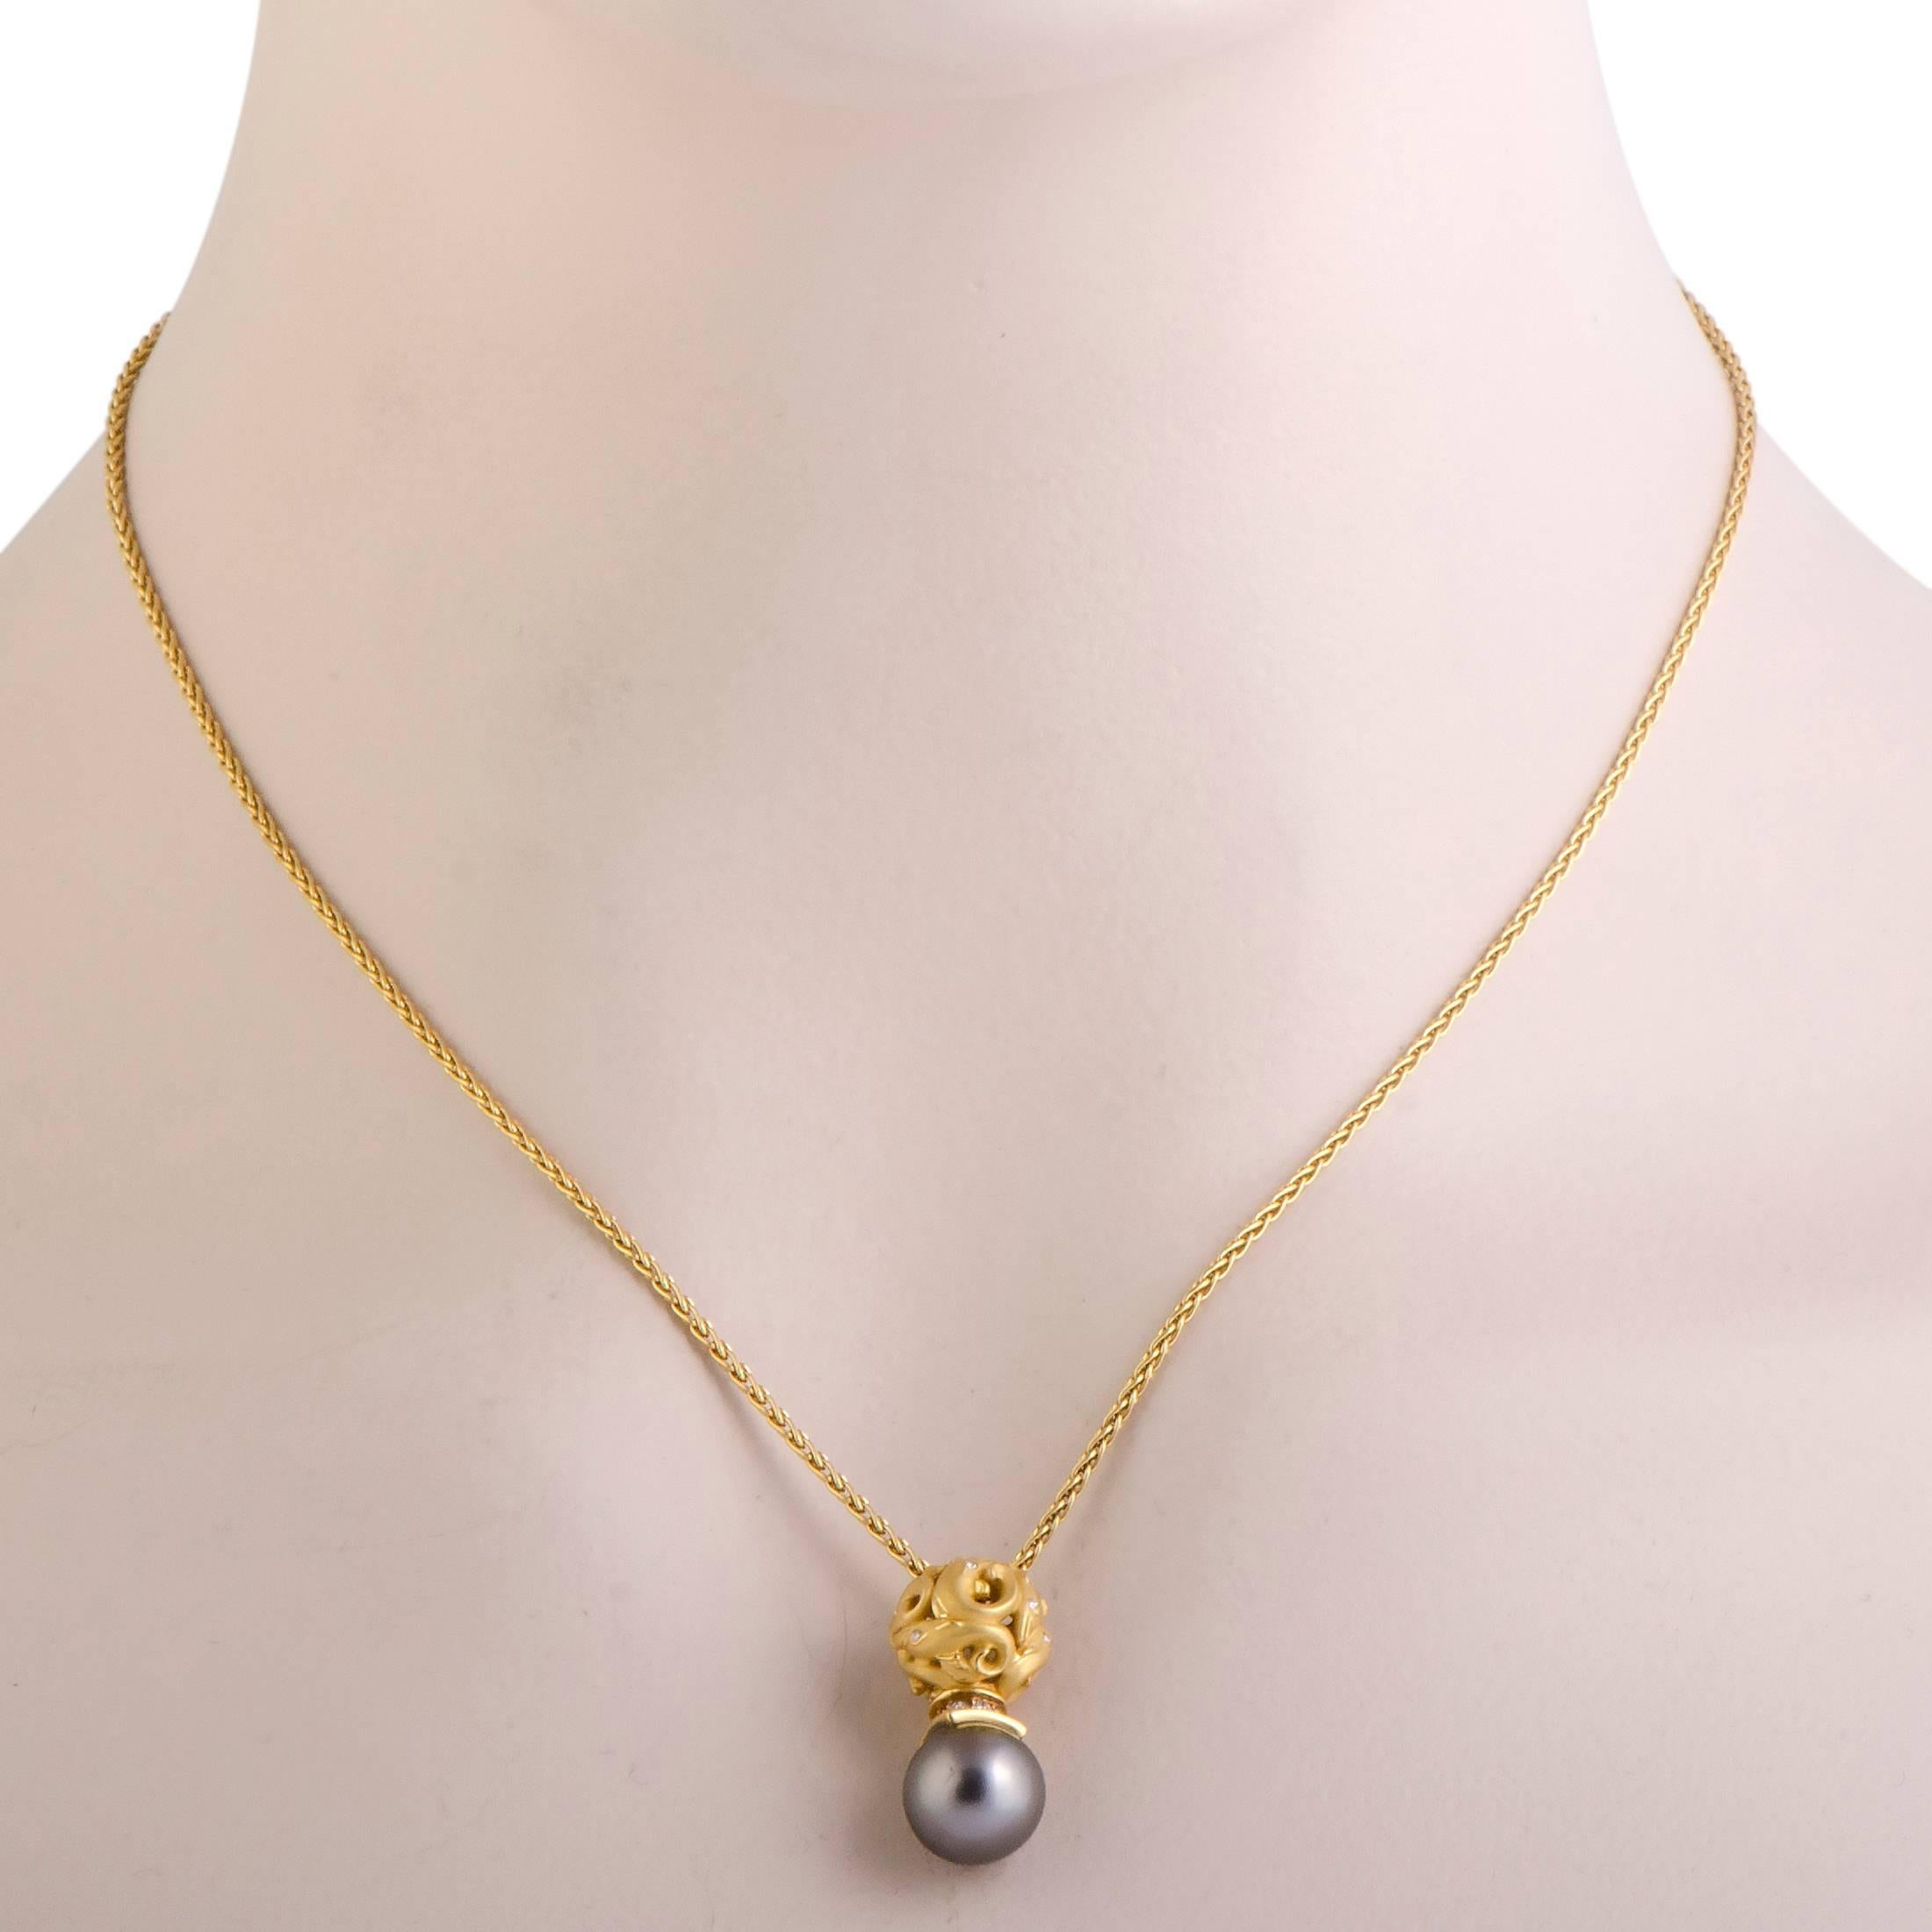 Made of attractive 18K yellow gold and embellished with scintillating diamond stones - a combination that never fails to make a stunning luxurious effect – this splendid necklace from Carrera y Carrera also has a nice mystical feel to it thanks to